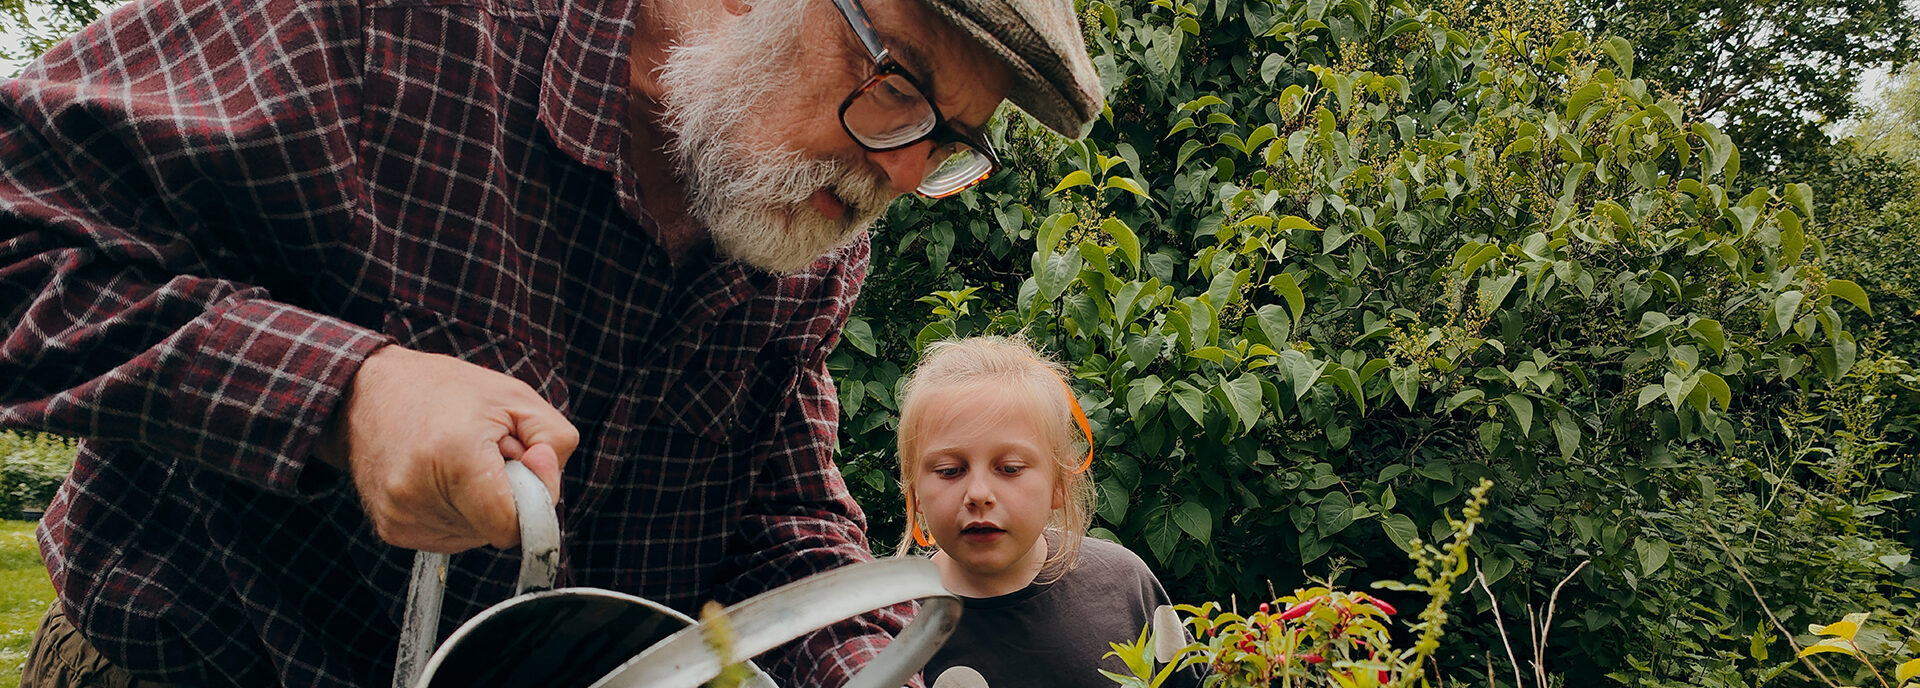 grandfather watering plants with grandchild